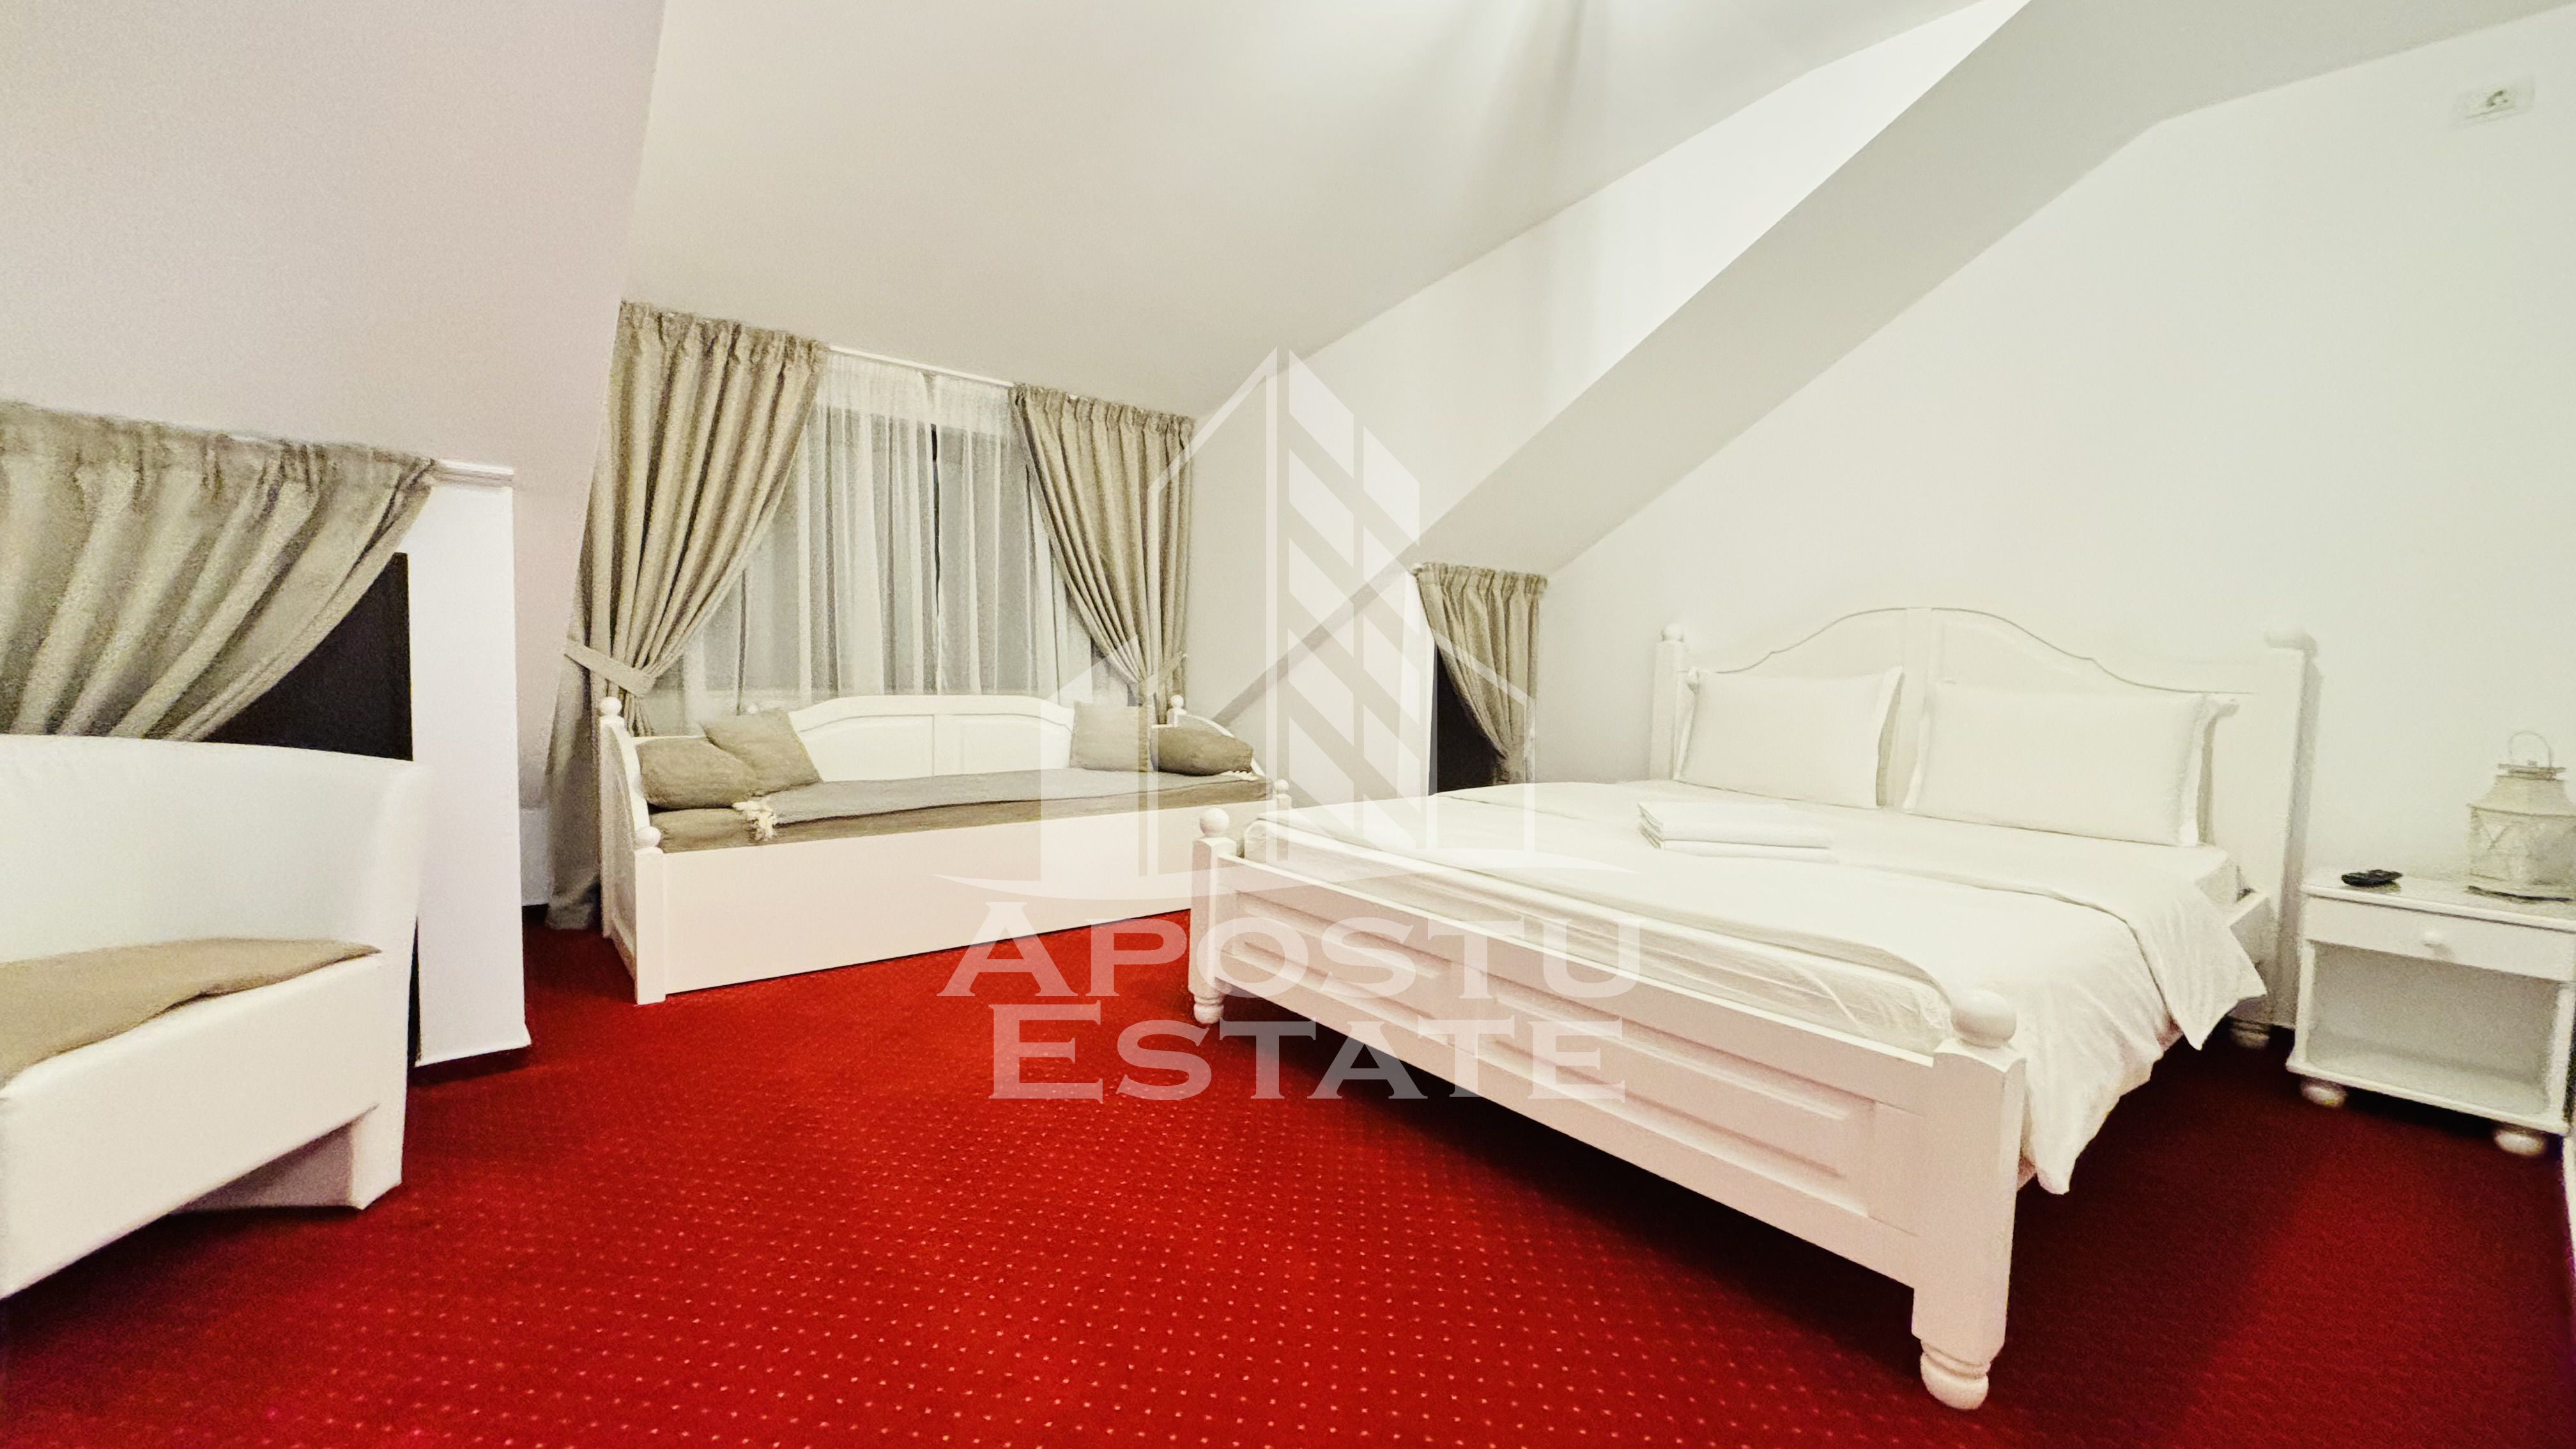 LUXURY apartment with two rooms in the Soarelui area